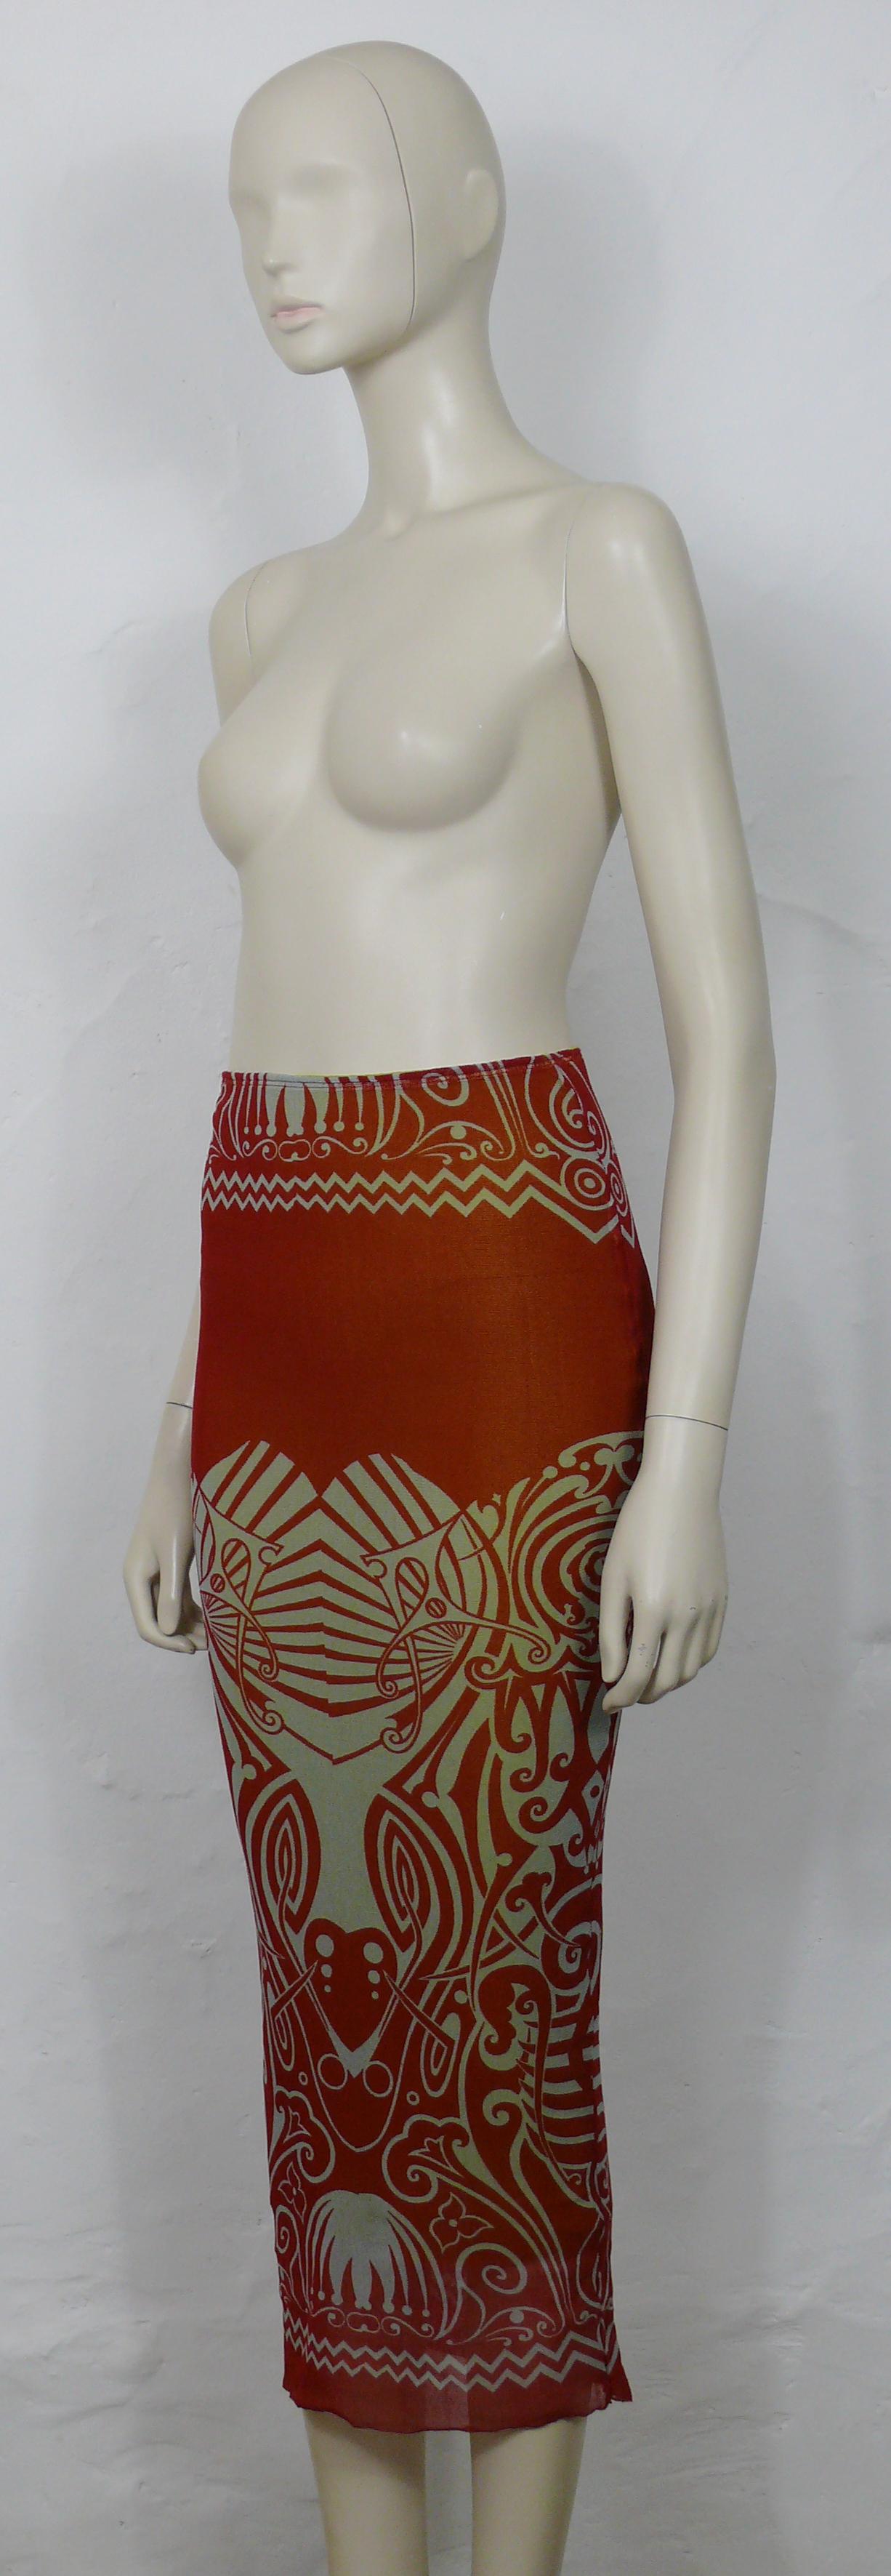 Jean Paul Gaultier Vintage Iconic Tribal Tattoo Print Mesh Skirt Size S In Good Condition For Sale In Nice, FR